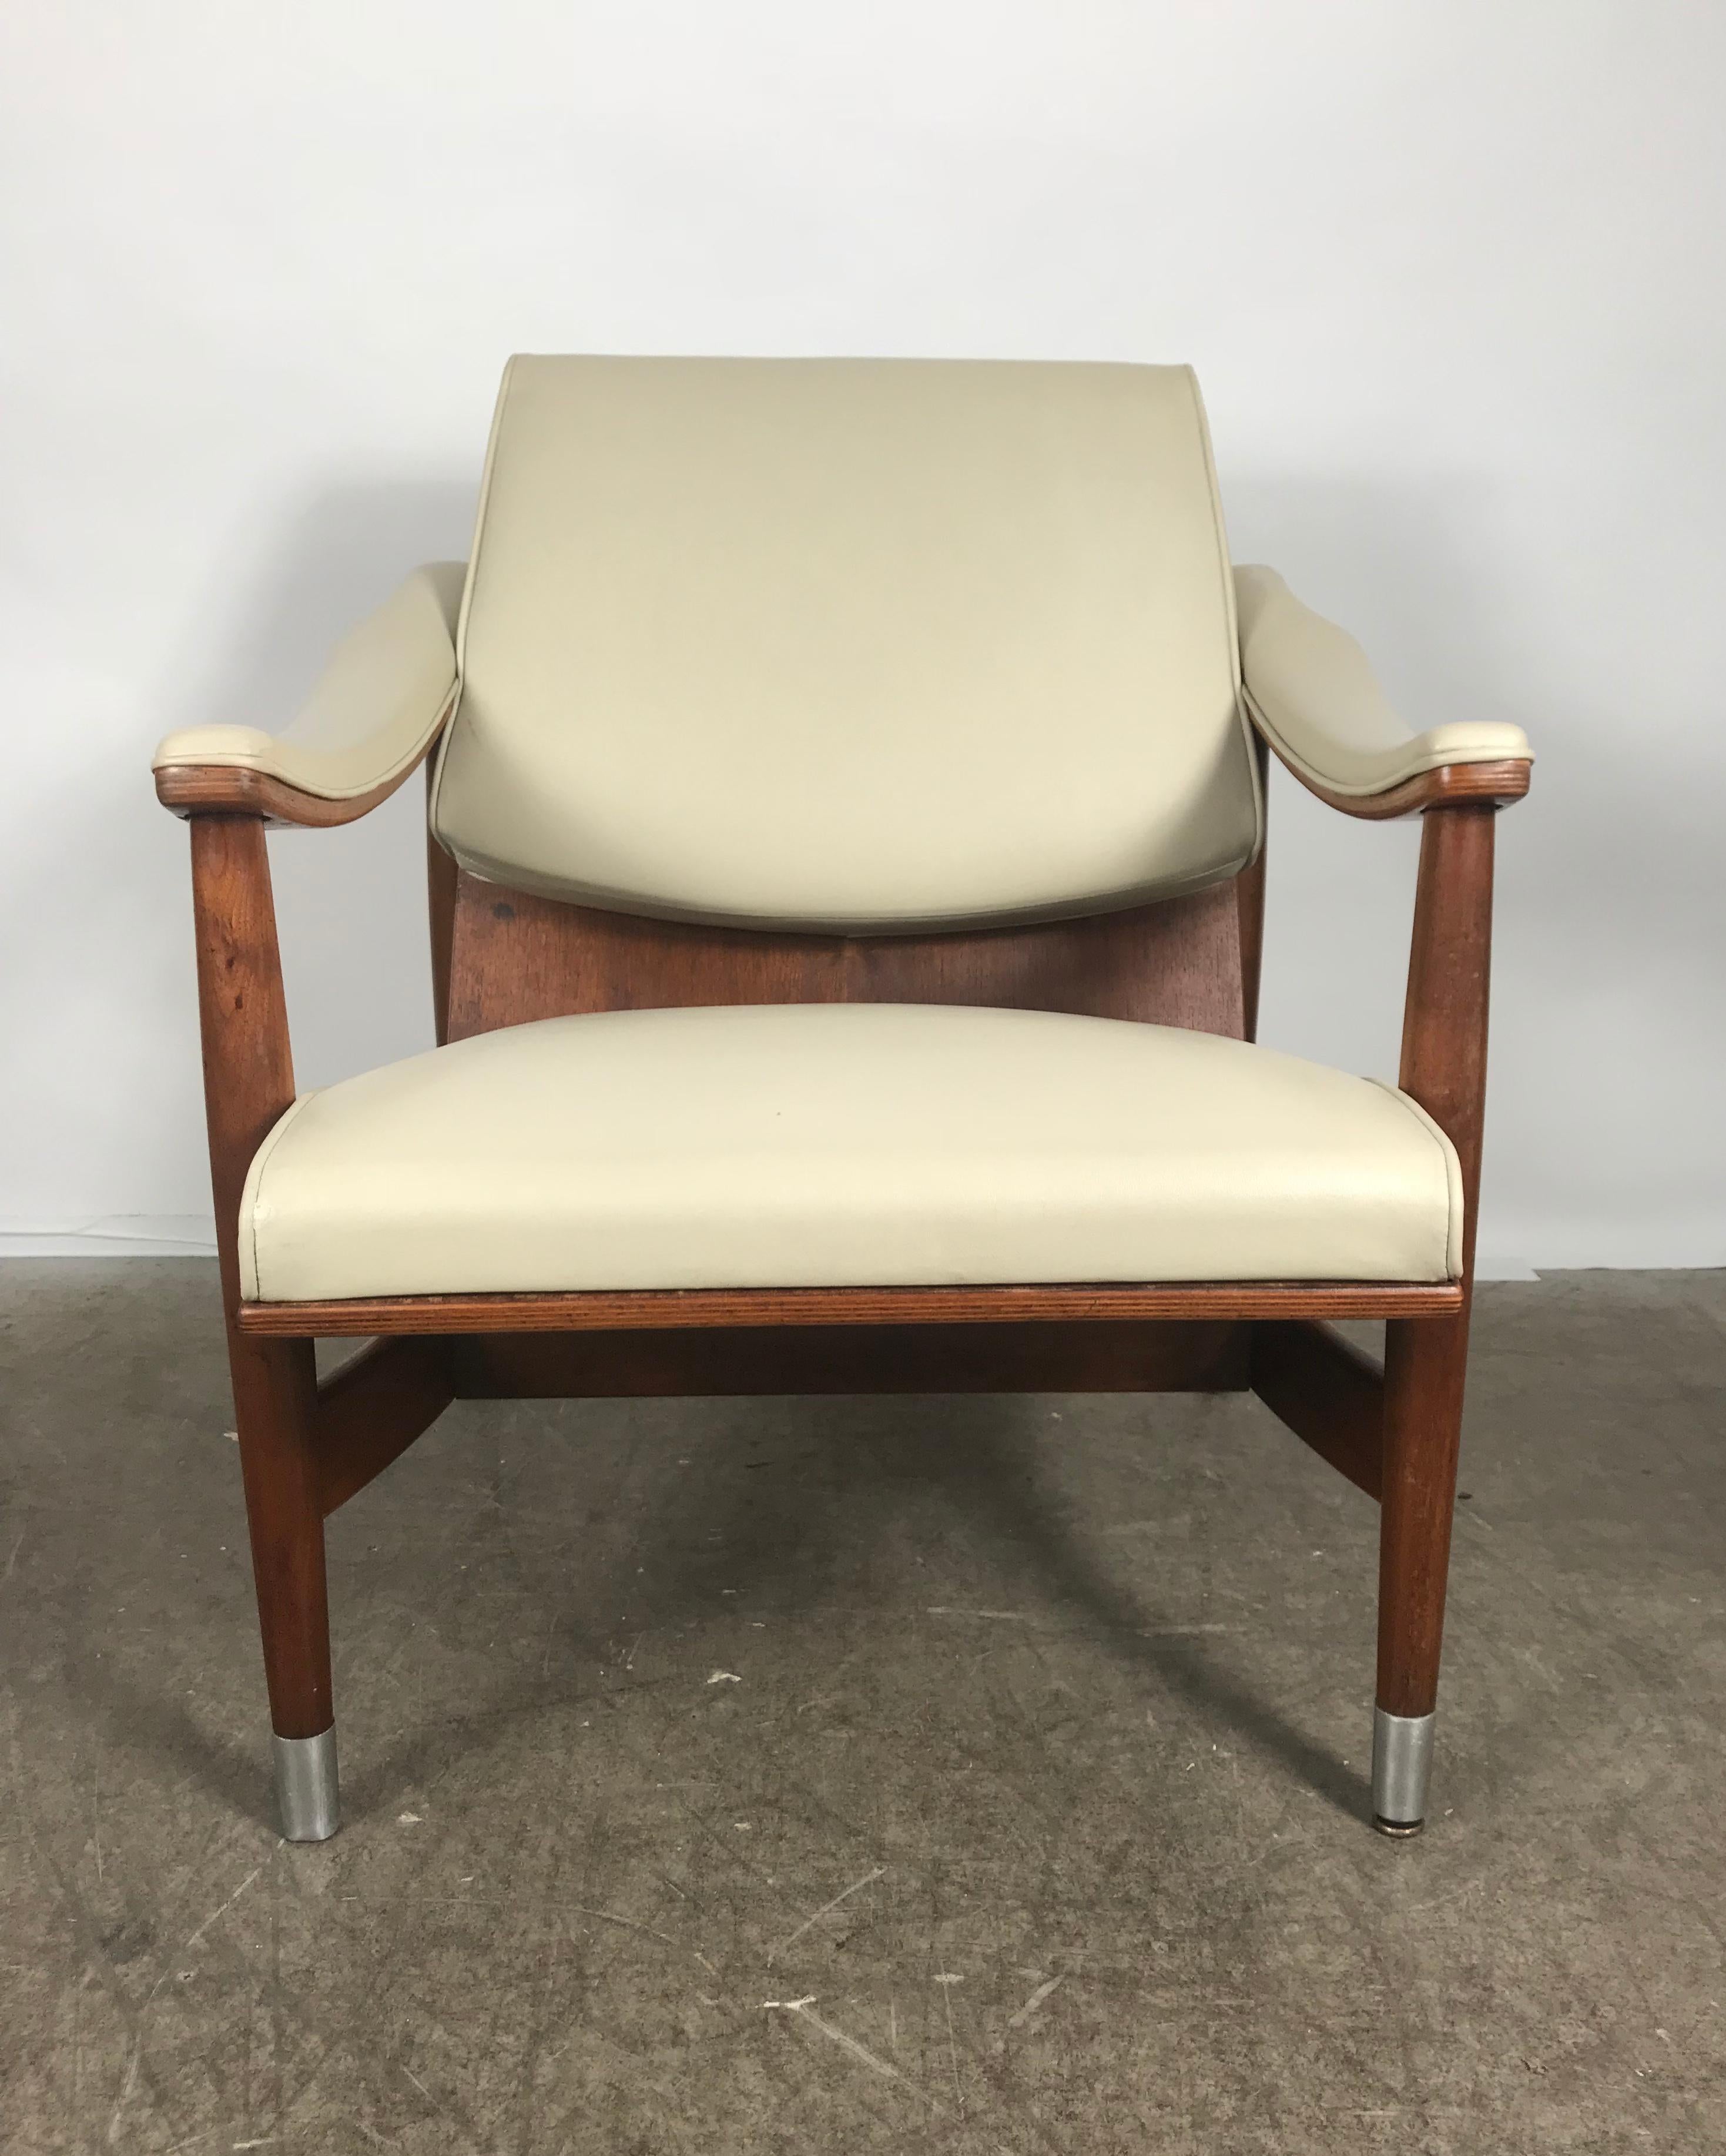 Classic Mid-Century Modern plywood scoop lounge chair by Thonet. Amazing design, superior quality and construction, heavy, retains original creamy white Naugahyde fabric, hand delivery avail to New York City or anywhere en route from Buffalo NY.